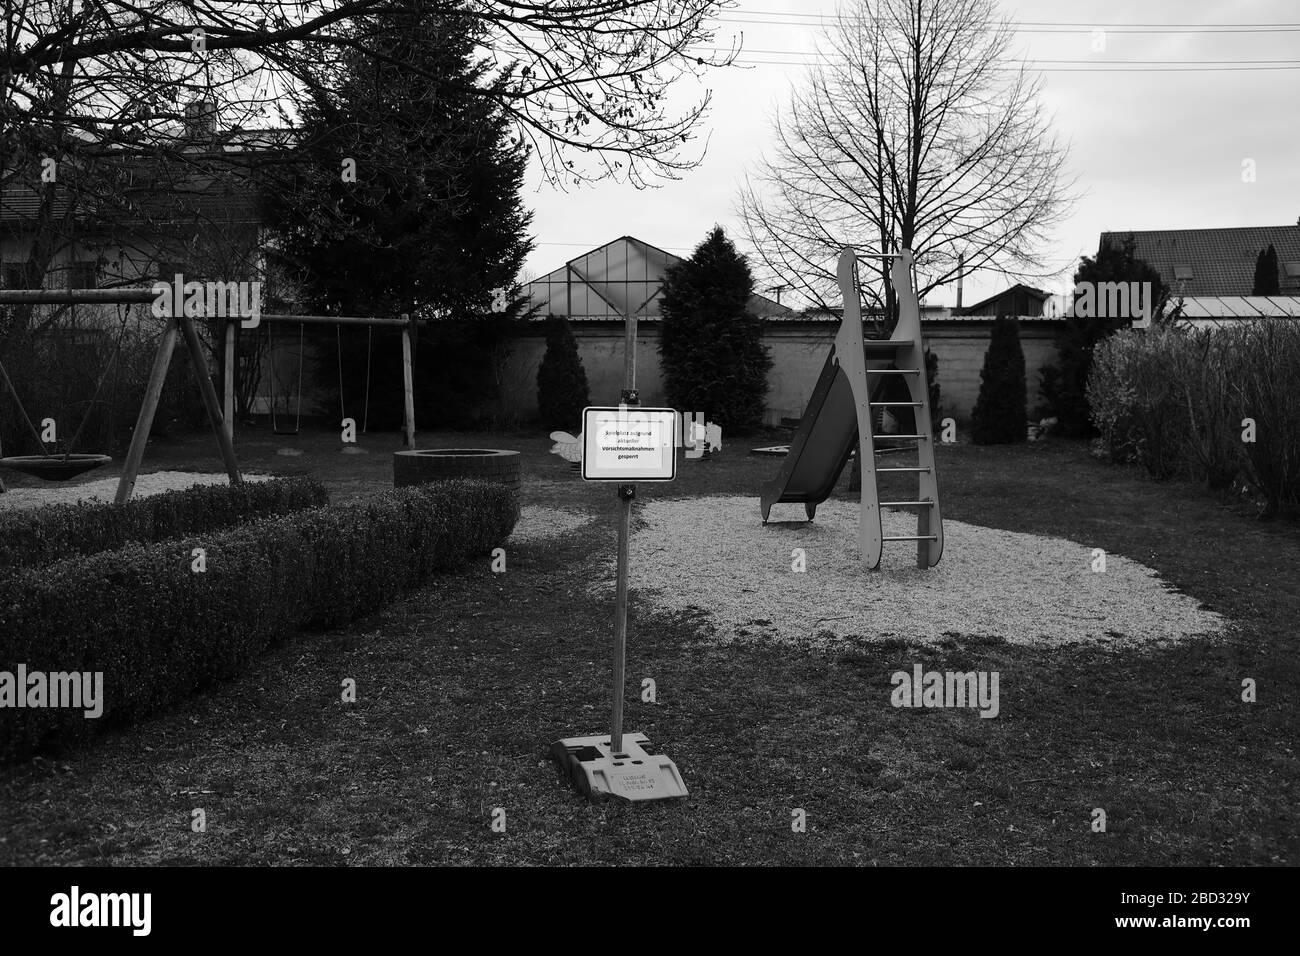 Closed Playground in a small village Stock Photo